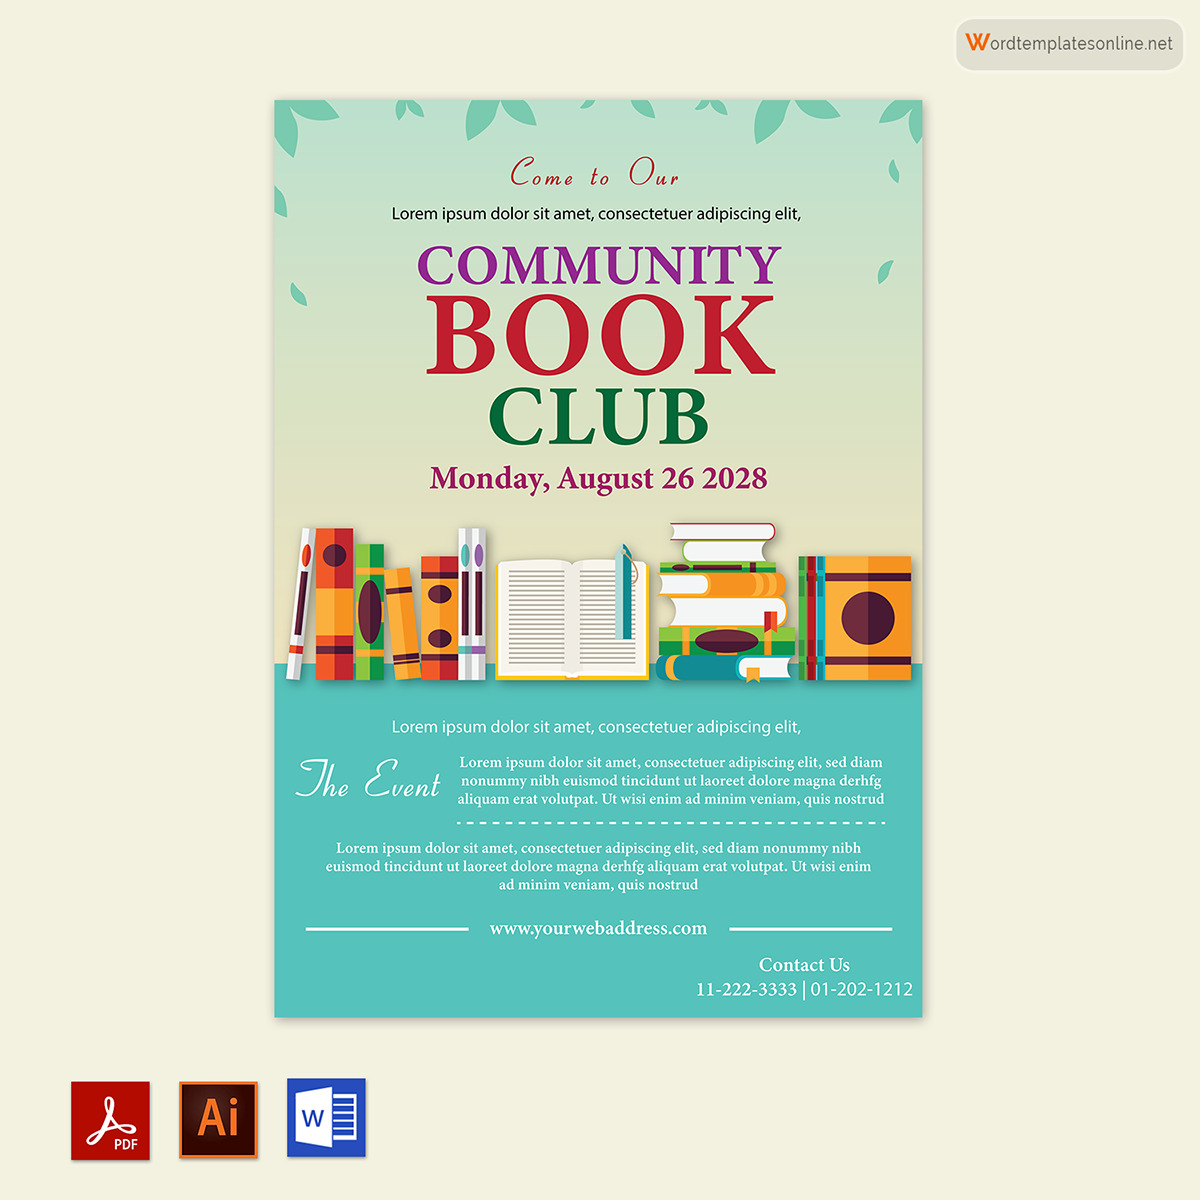 Book Club Flyer Design Templates - Free Word, PSD, AI Example